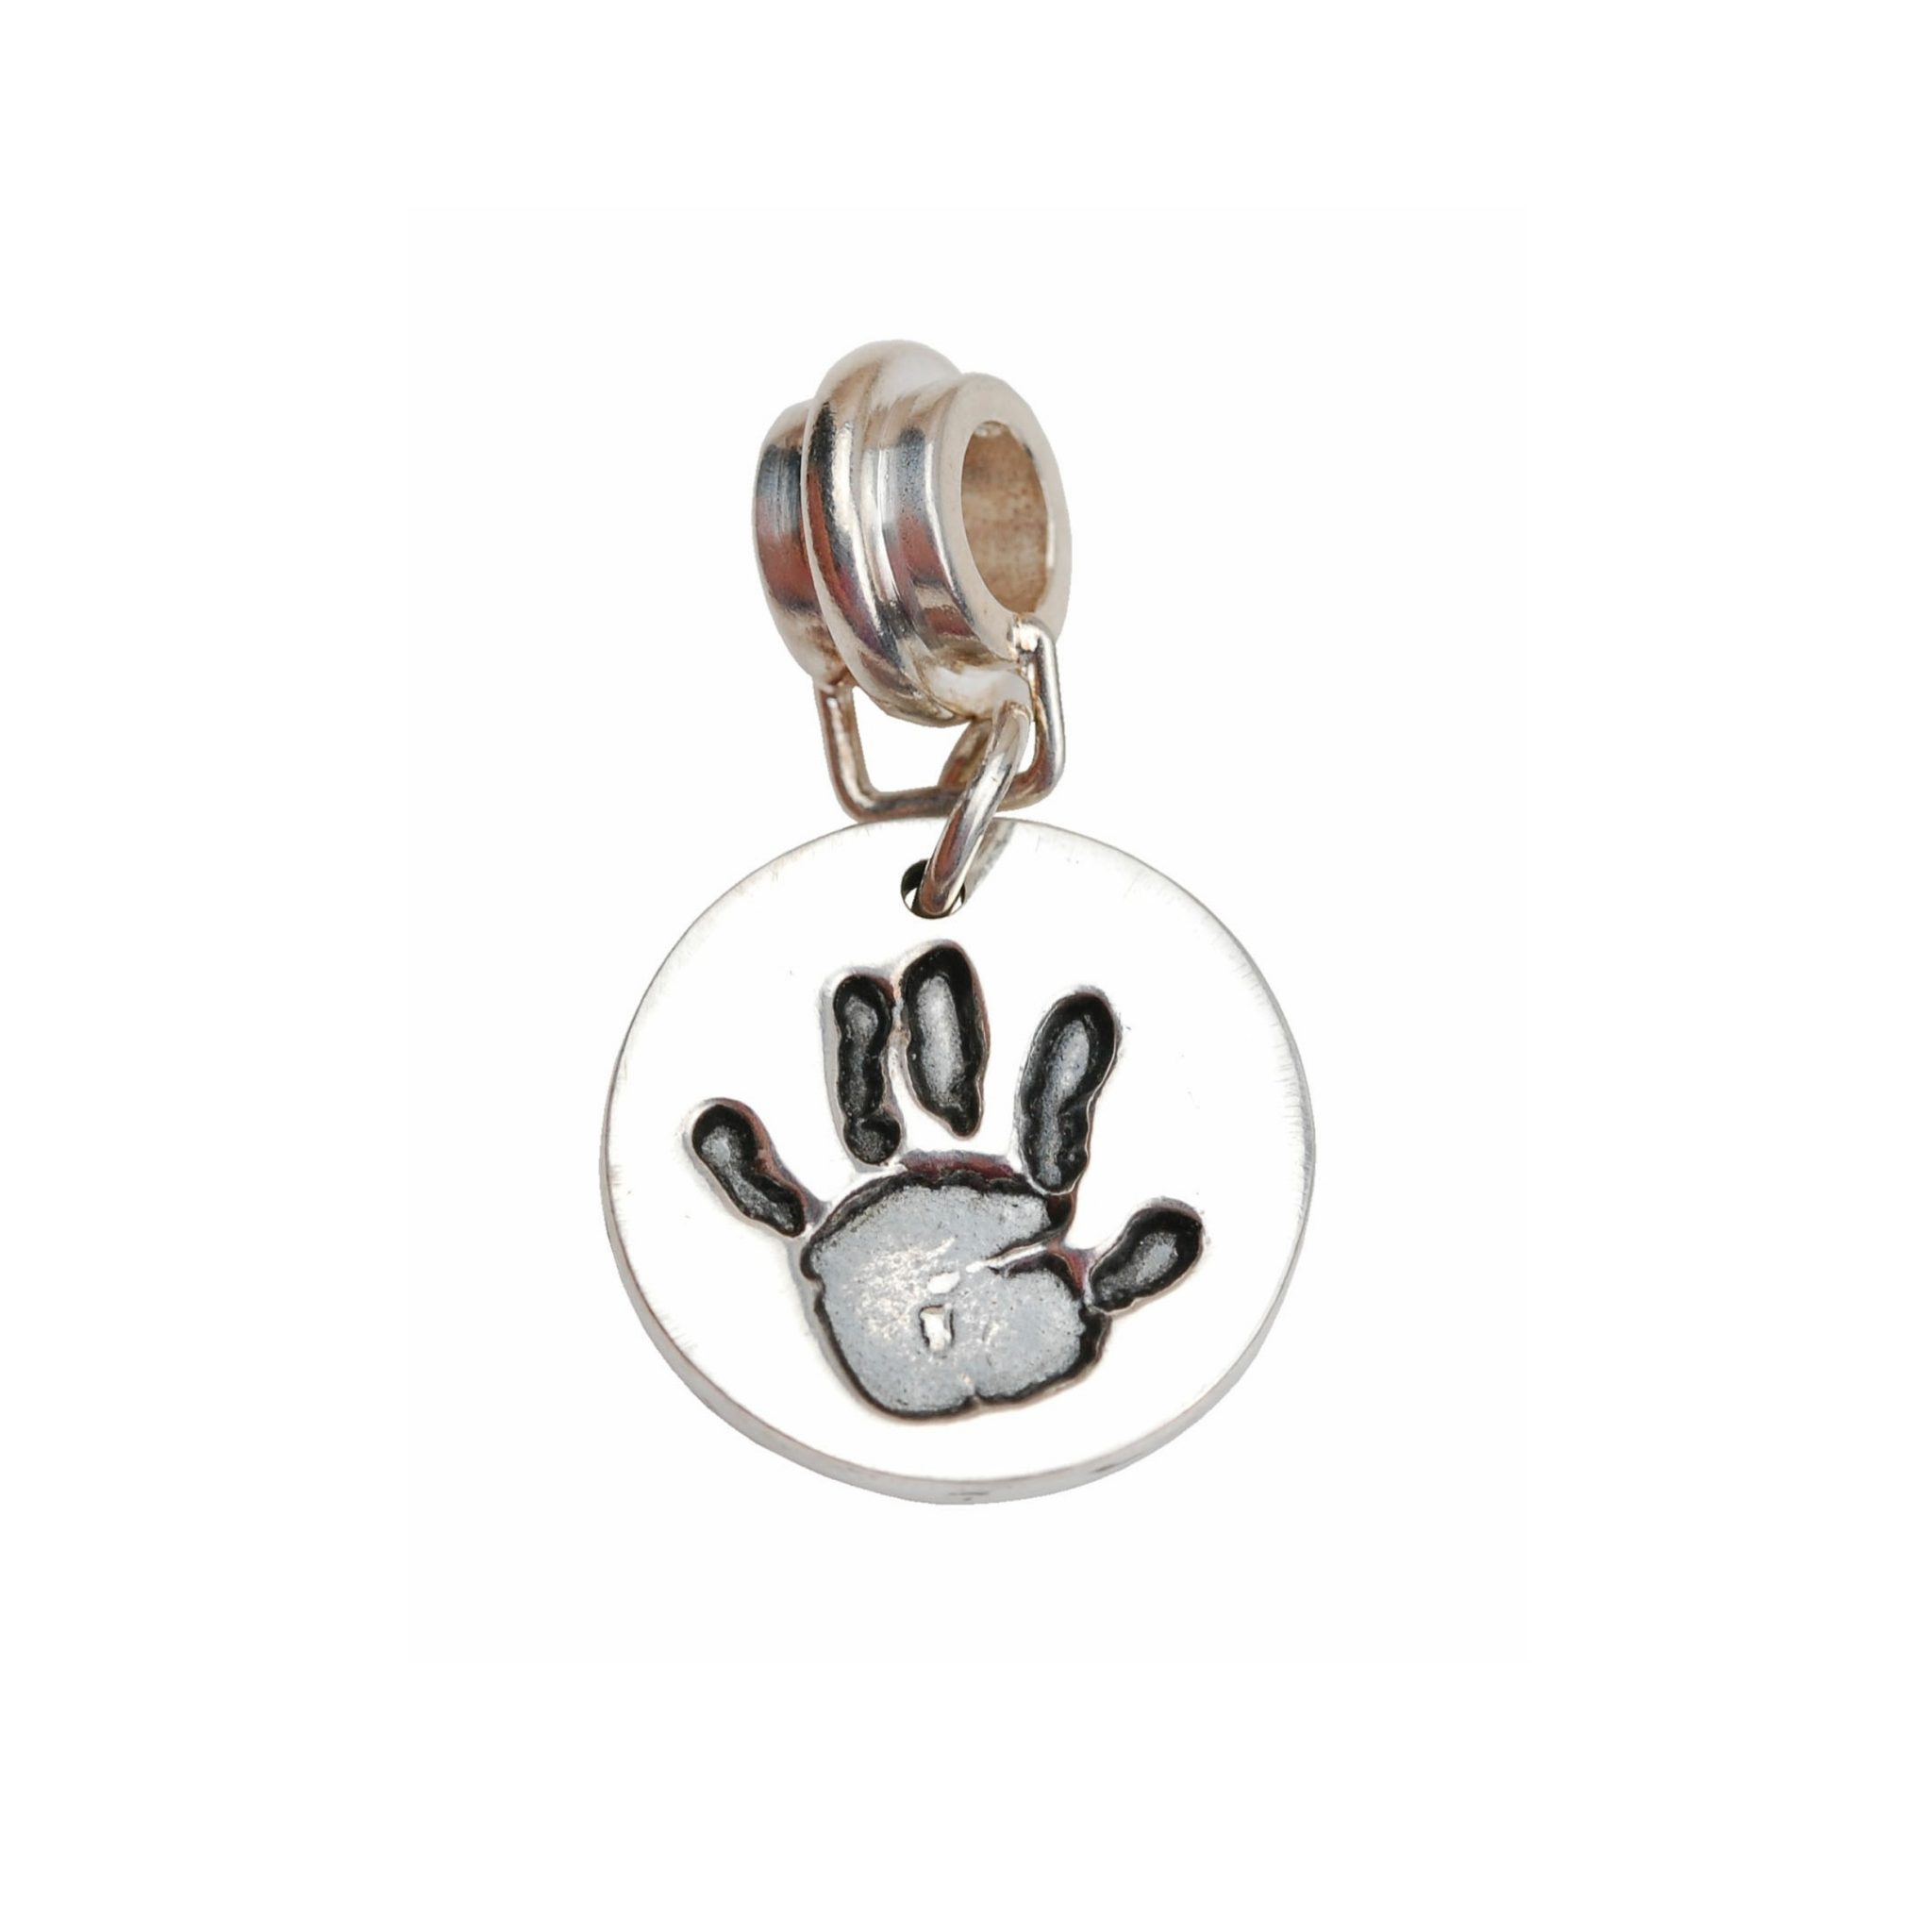 Small silver handprint charm with charm carrier